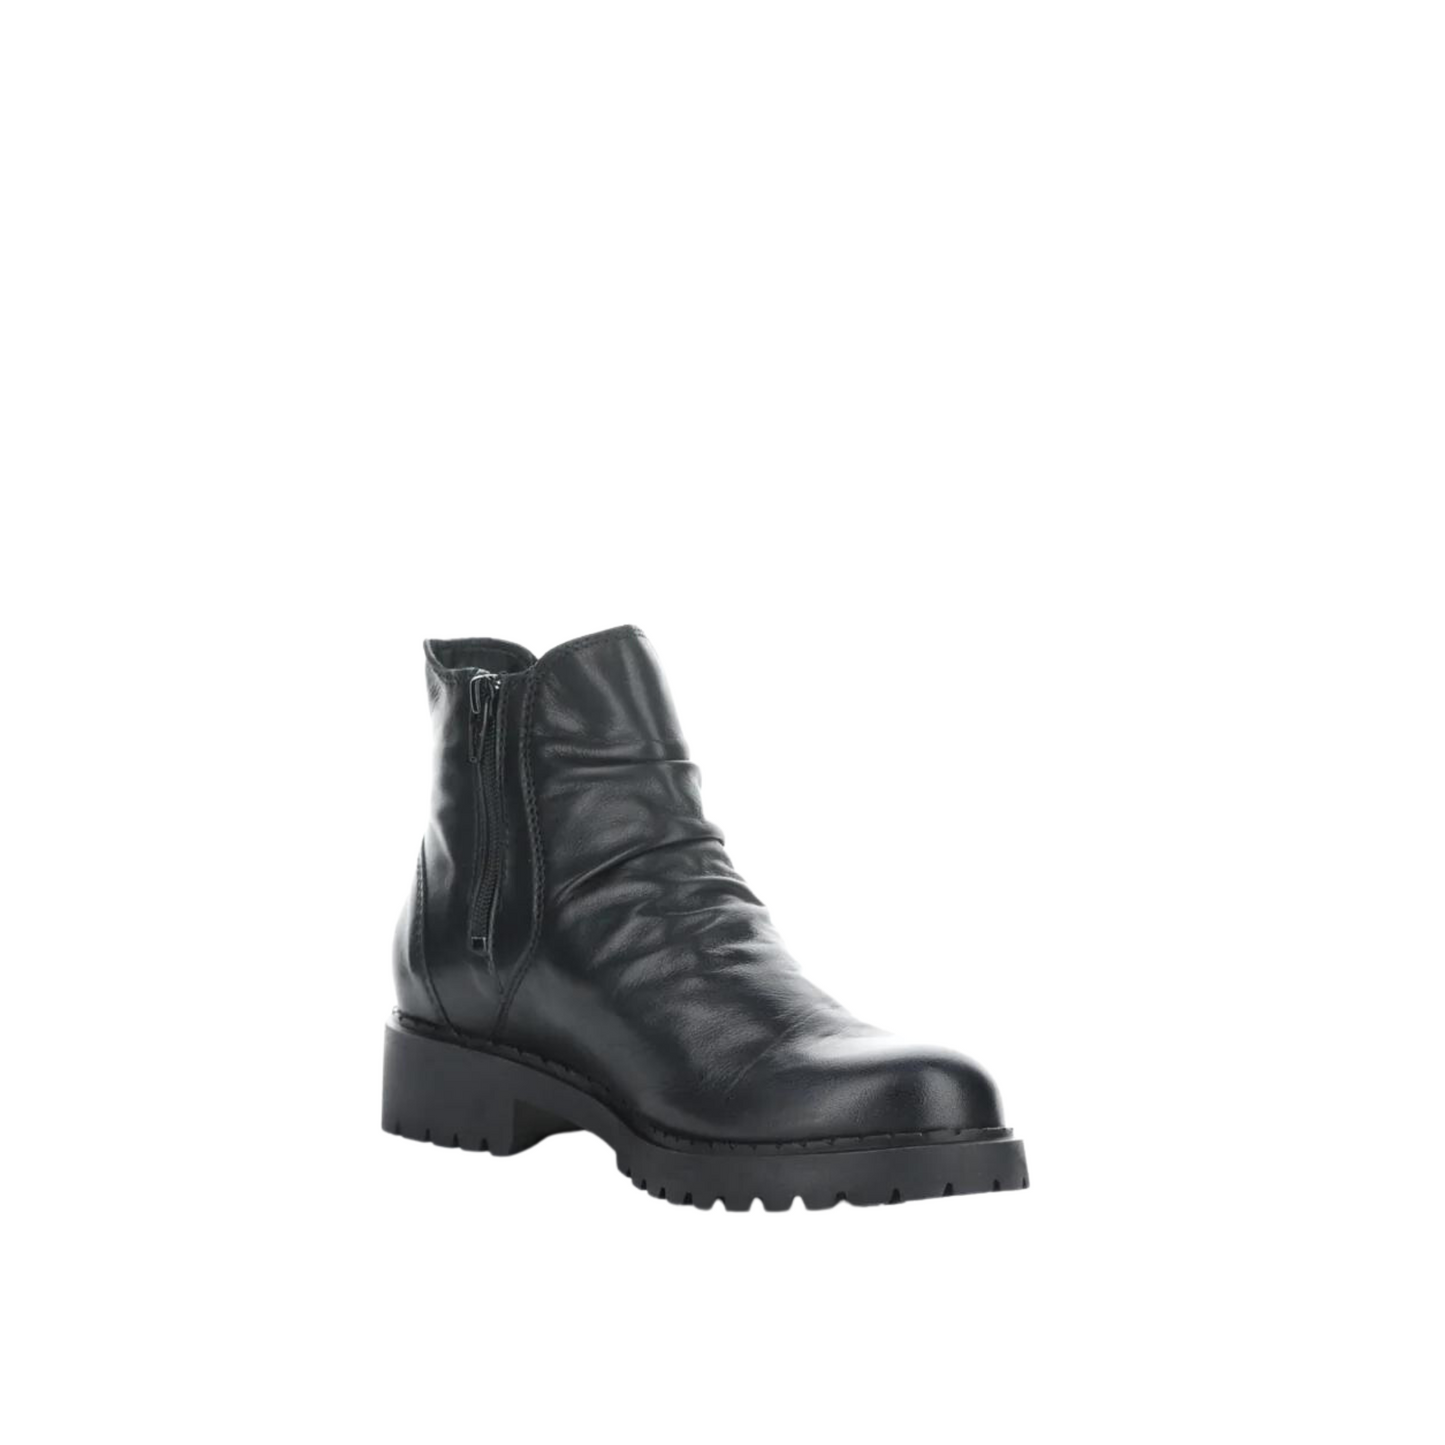 Front angled profile of the Bos & Co Barb Boot in the colour Black.